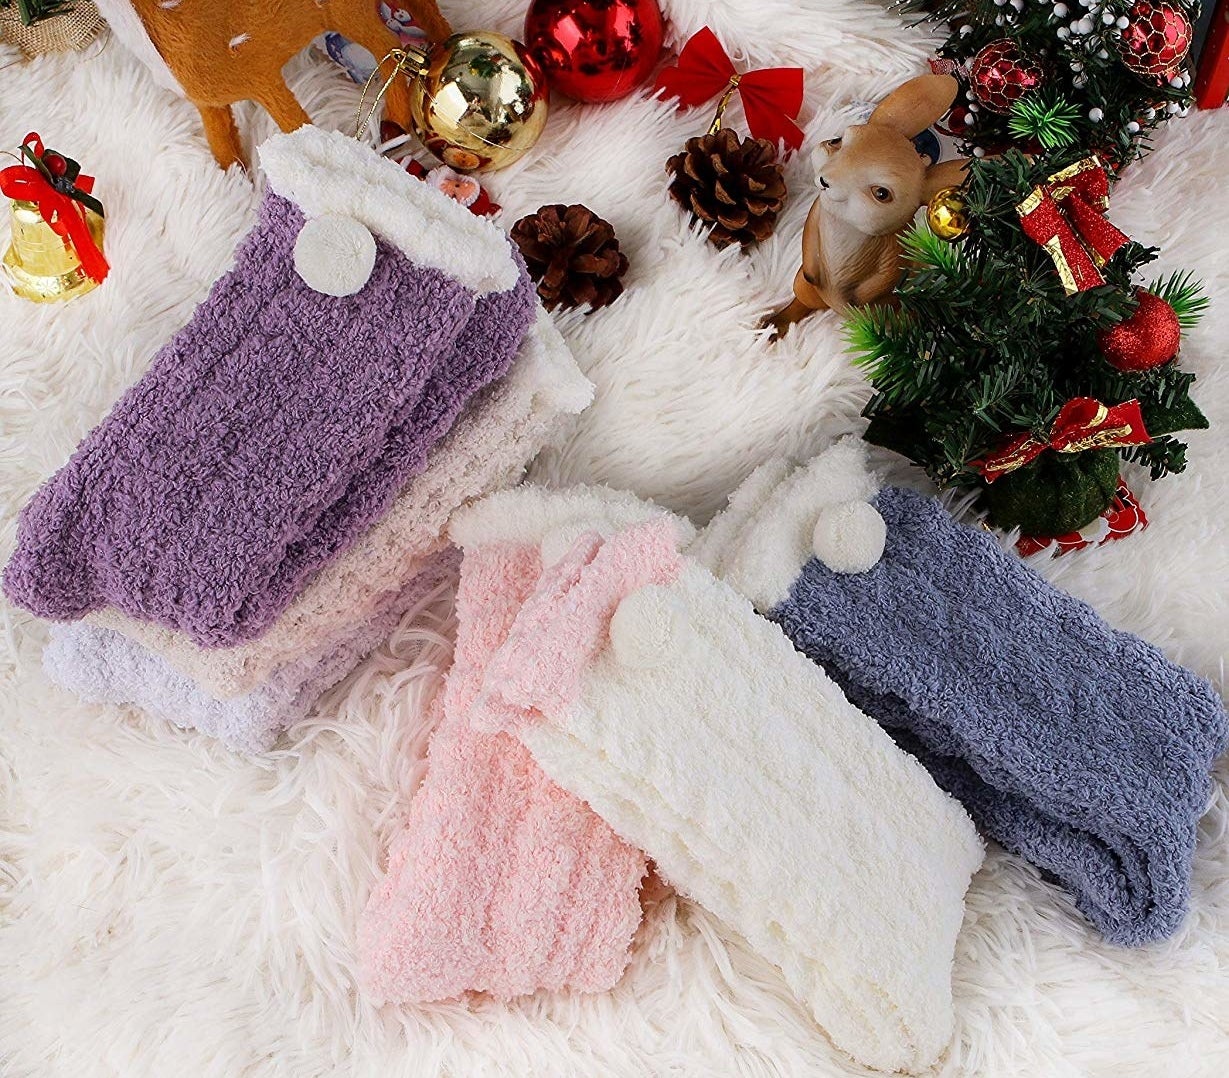 18 Products That Are So Fluffy I'm Gonna Die